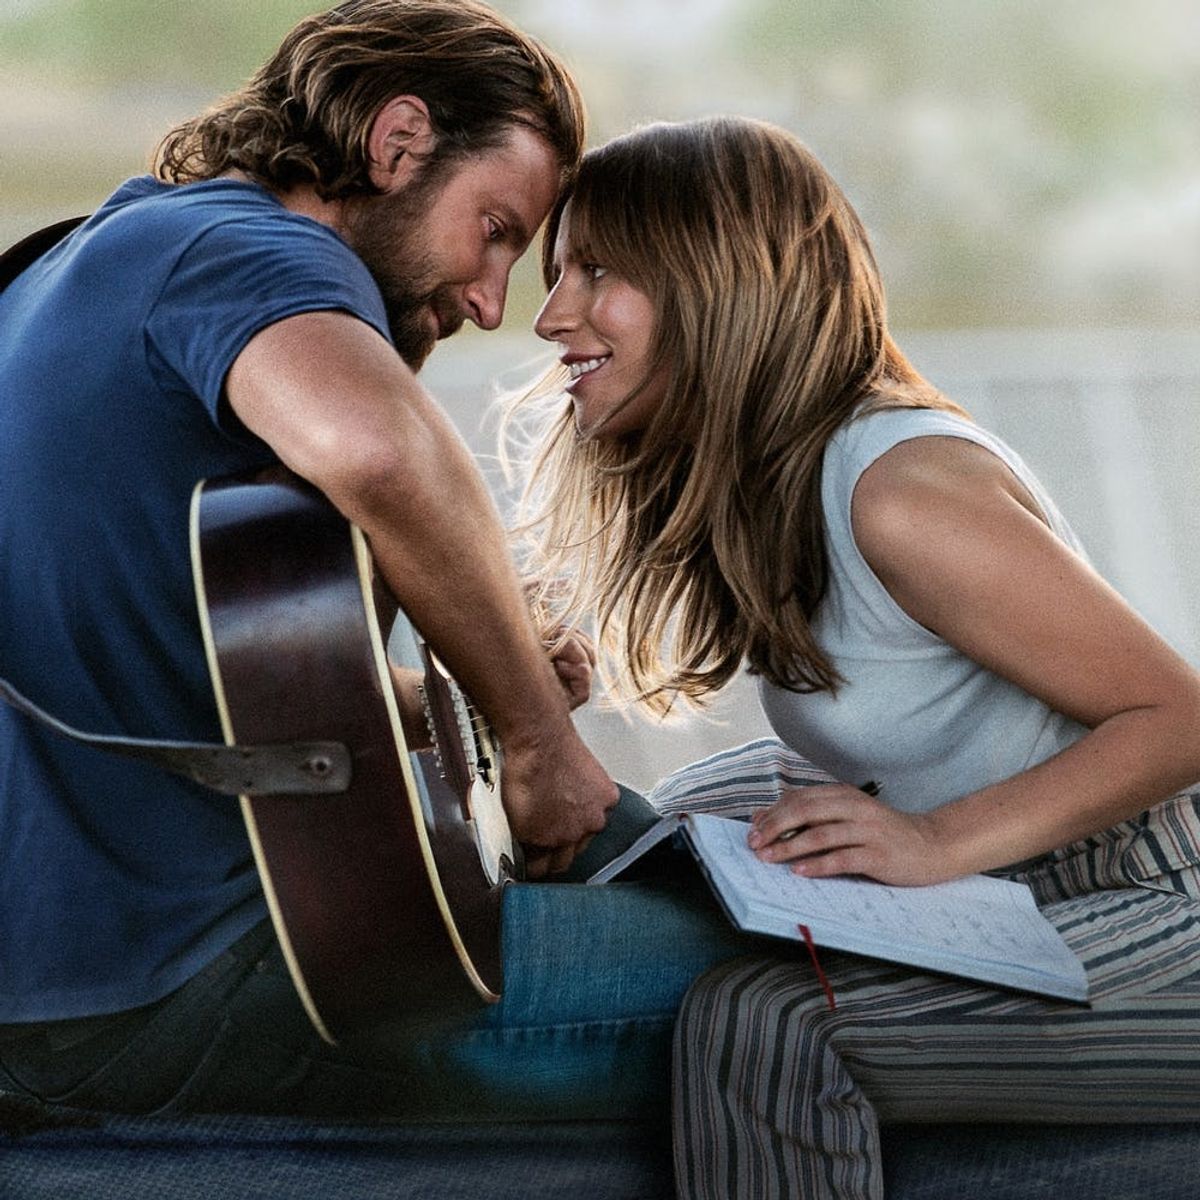 Lady Gaga and Bradley Cooper’s ‘A Star Is Born’ Soundtrack Will Feature 19 Songs